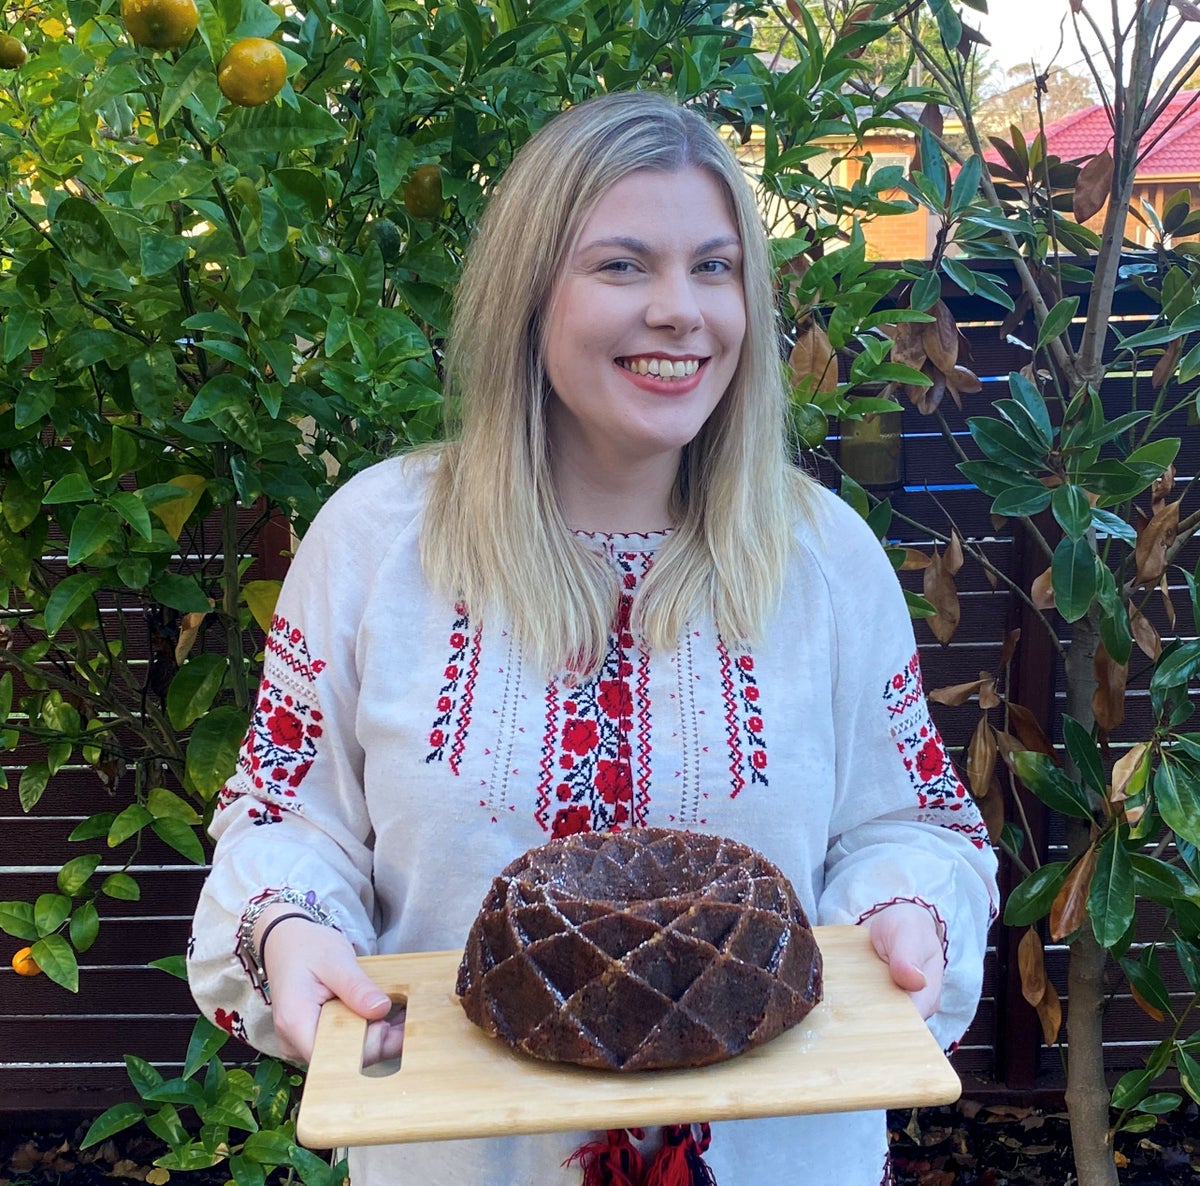 Nicole Campbell, wearing a traditional vyshyvanka, is holding the Ukrainian Honey and Poppyseed cake which was baked while fundraising for #CookForUkraine.